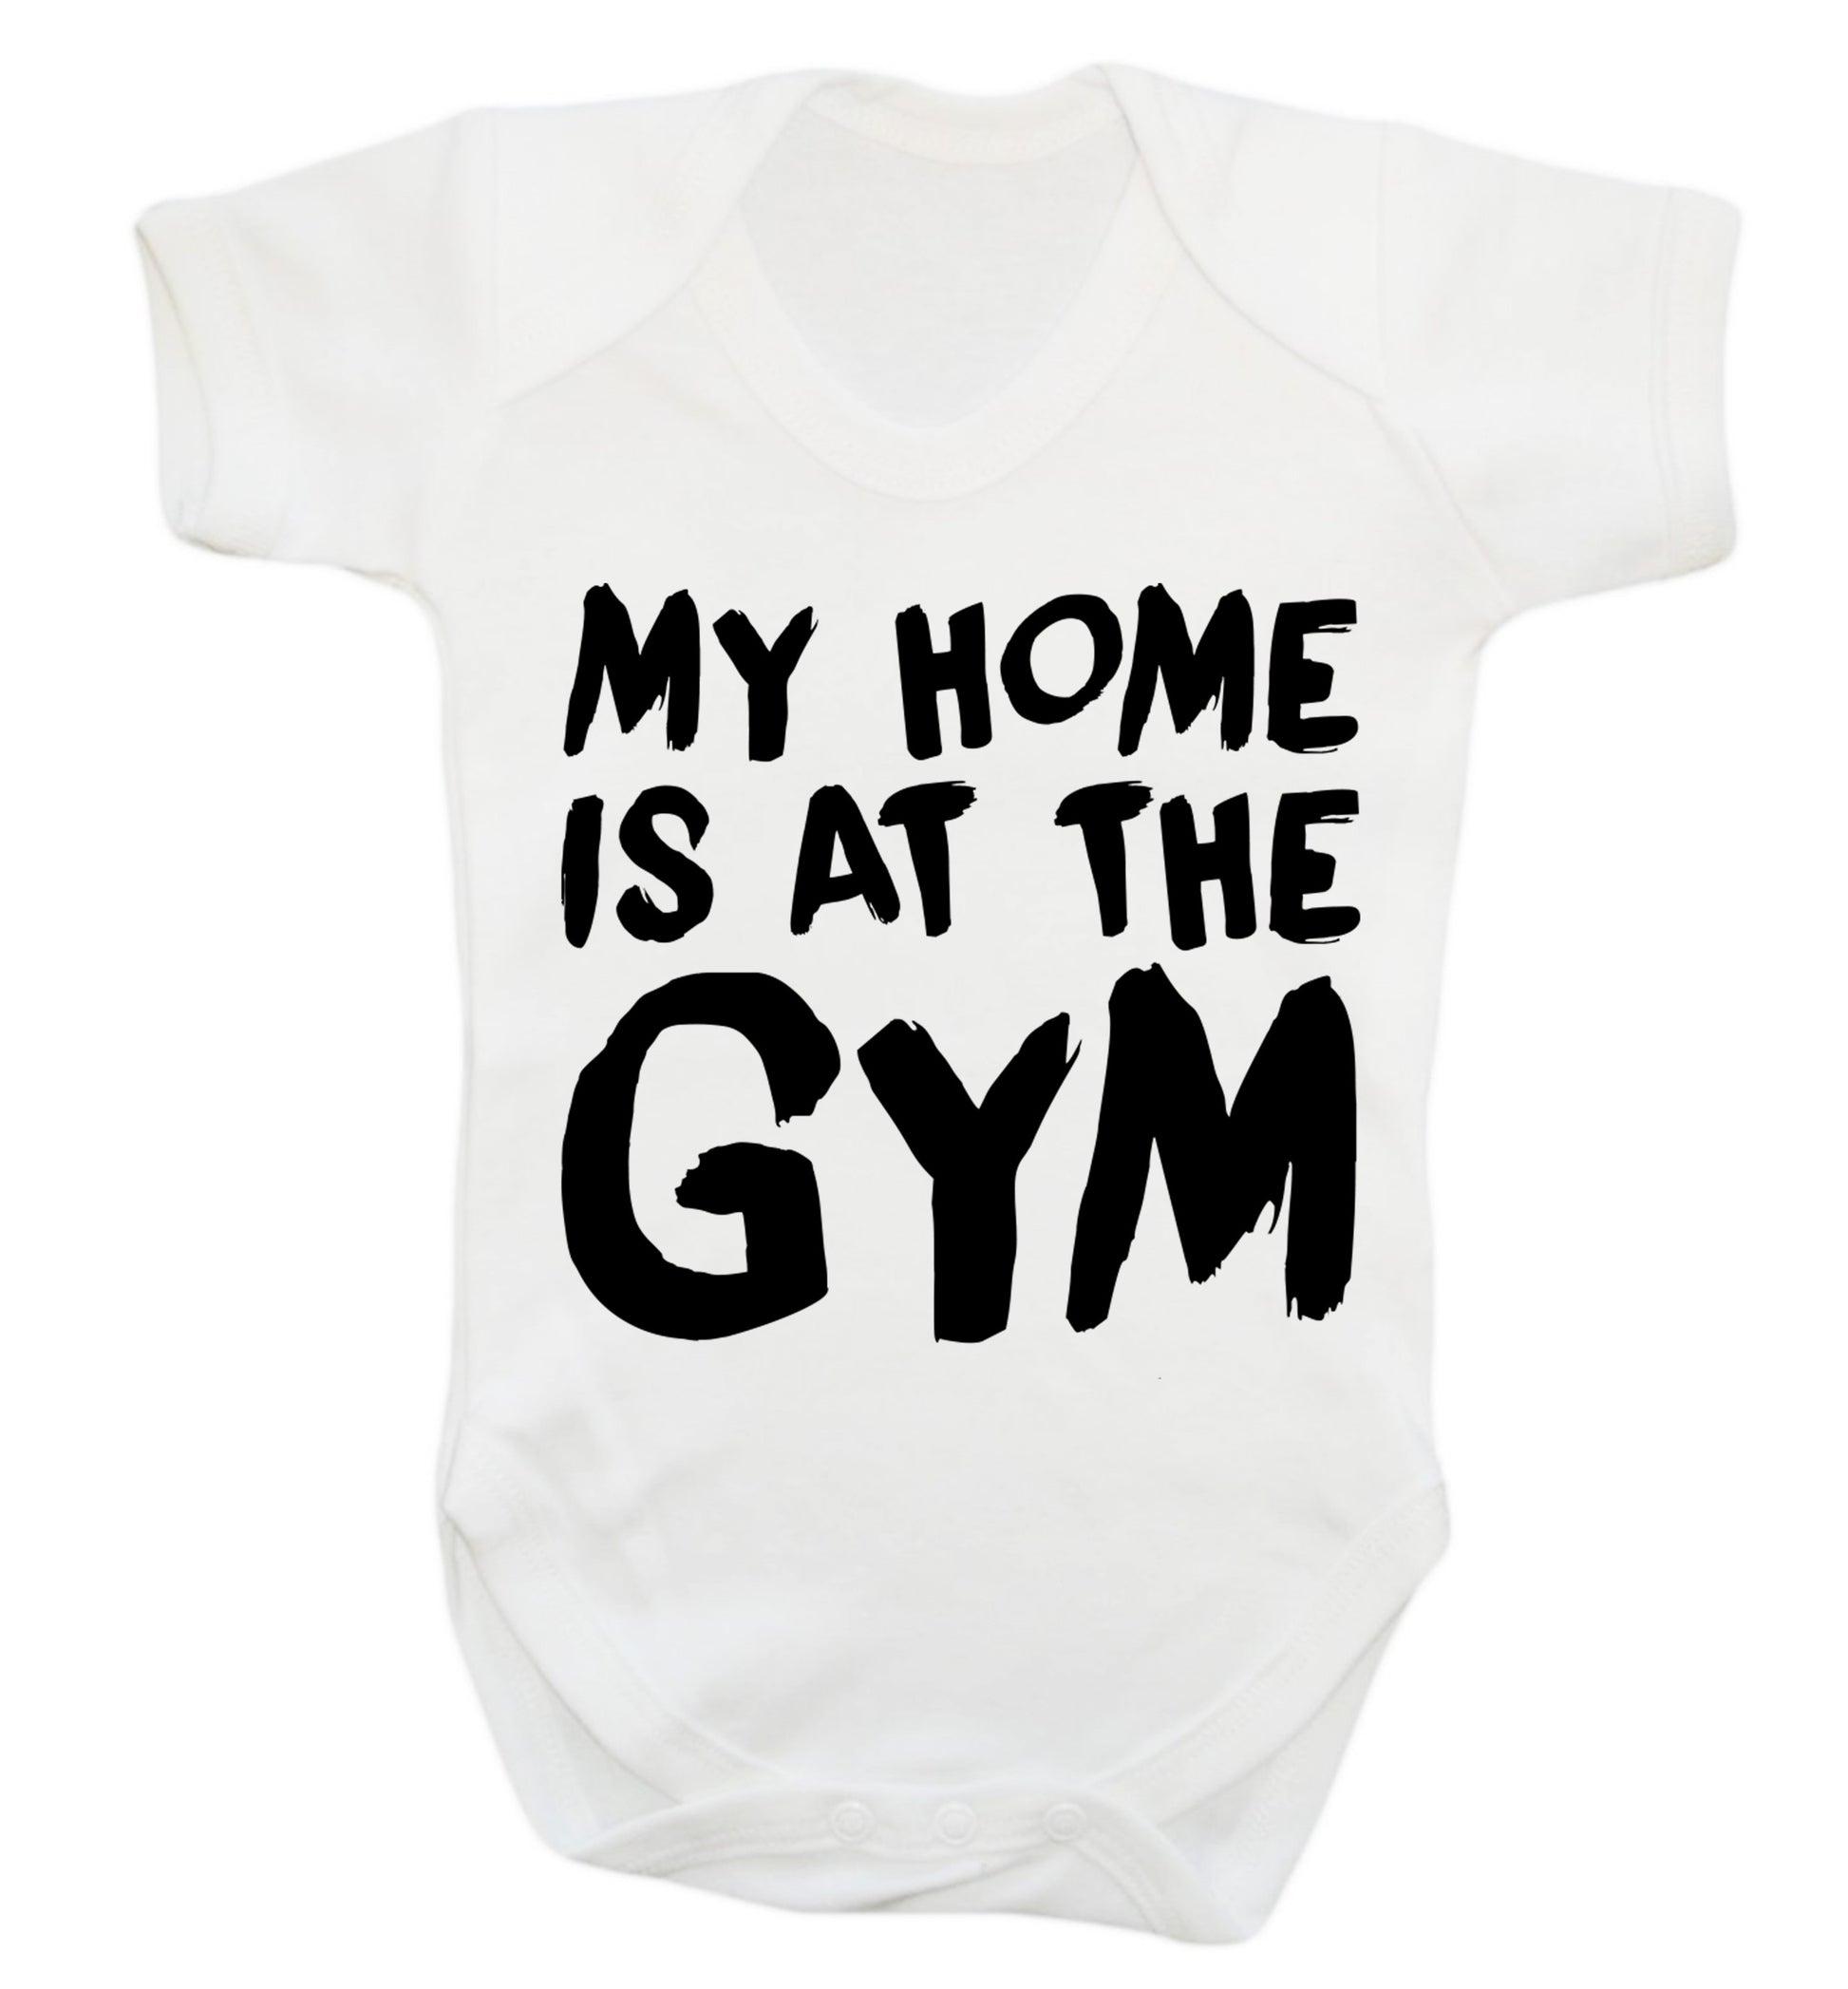 My home is at the gym Baby Vest white 18-24 months